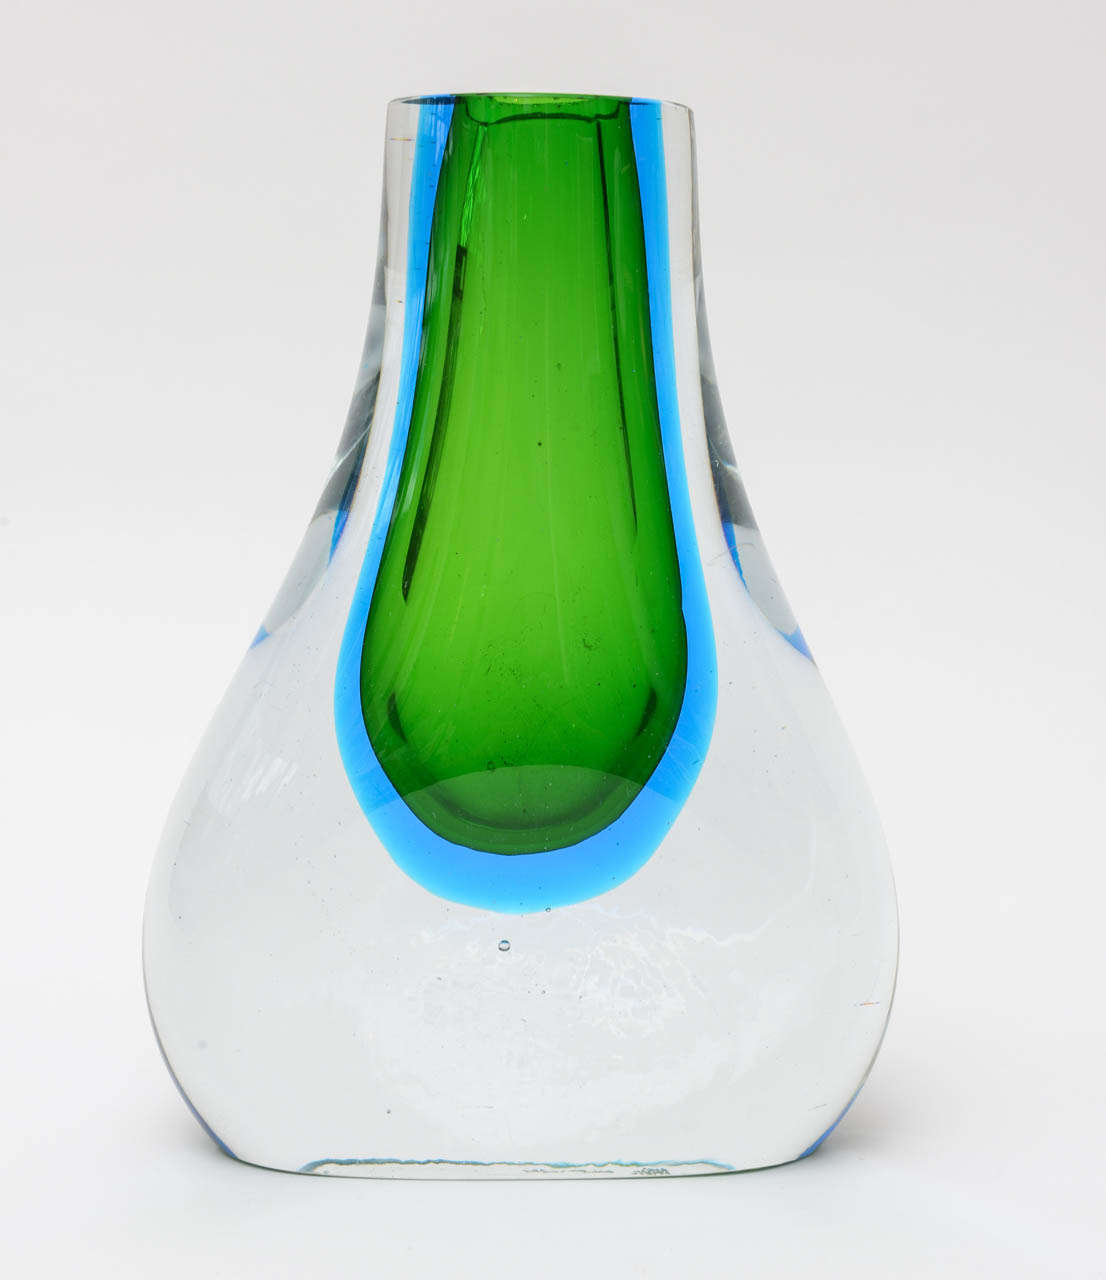 The amazing colors of this signed Blenko glass vase/object has the luscious colors of sommerso  glass in sapphire turquoise blue and  kelly green and clear.
The bottom is flat.
Truly, a stunner....